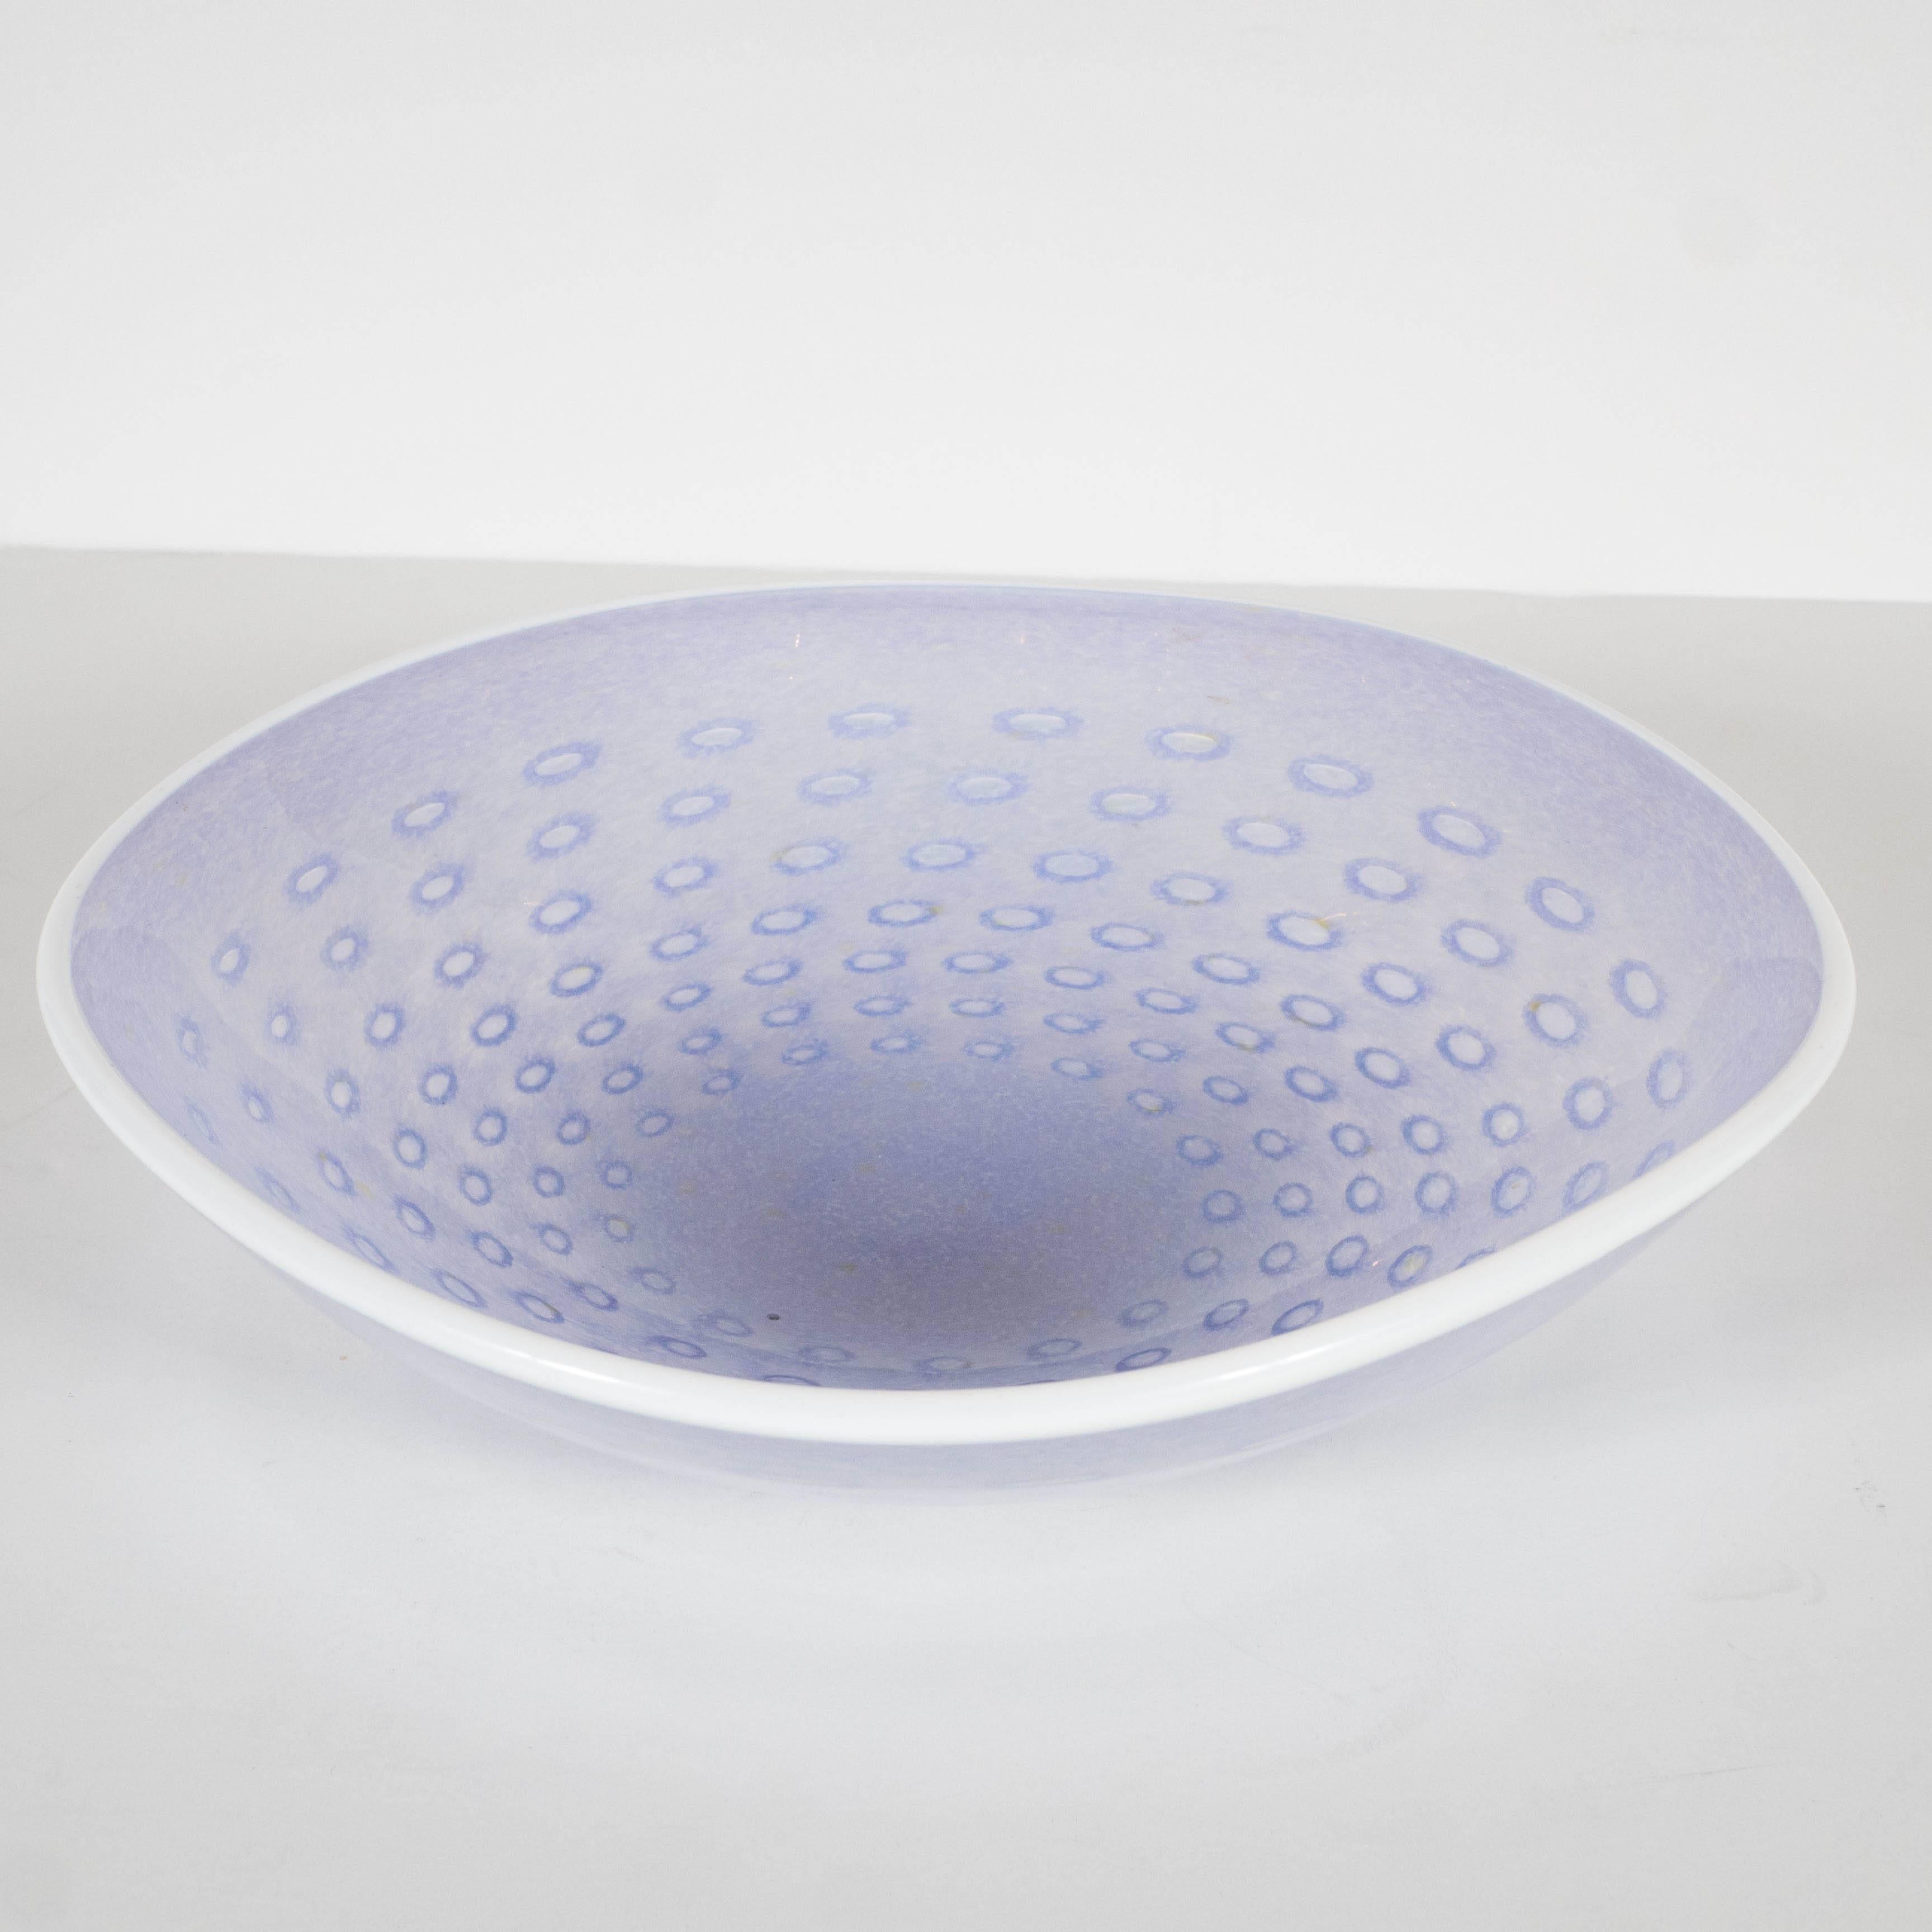 Translucent Handblown Murano Glass Bowl in Whites and Pale Lavender 2